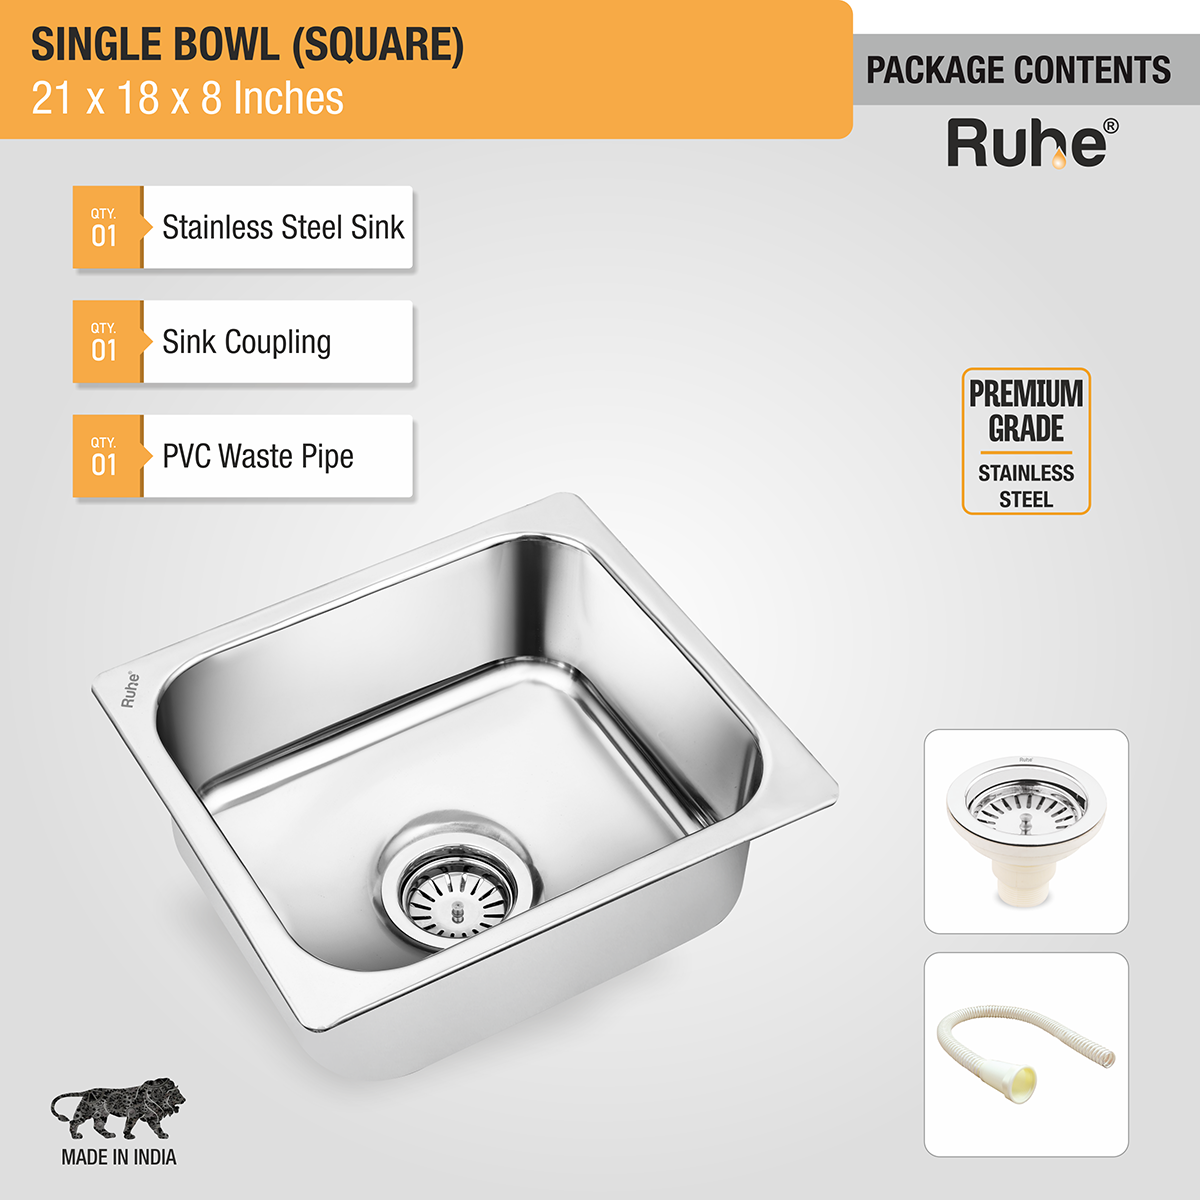 Square Single Bowl Kitchen Sink (21 x 18 x 8 inches) package content with sink coupling and pvc waste pipe